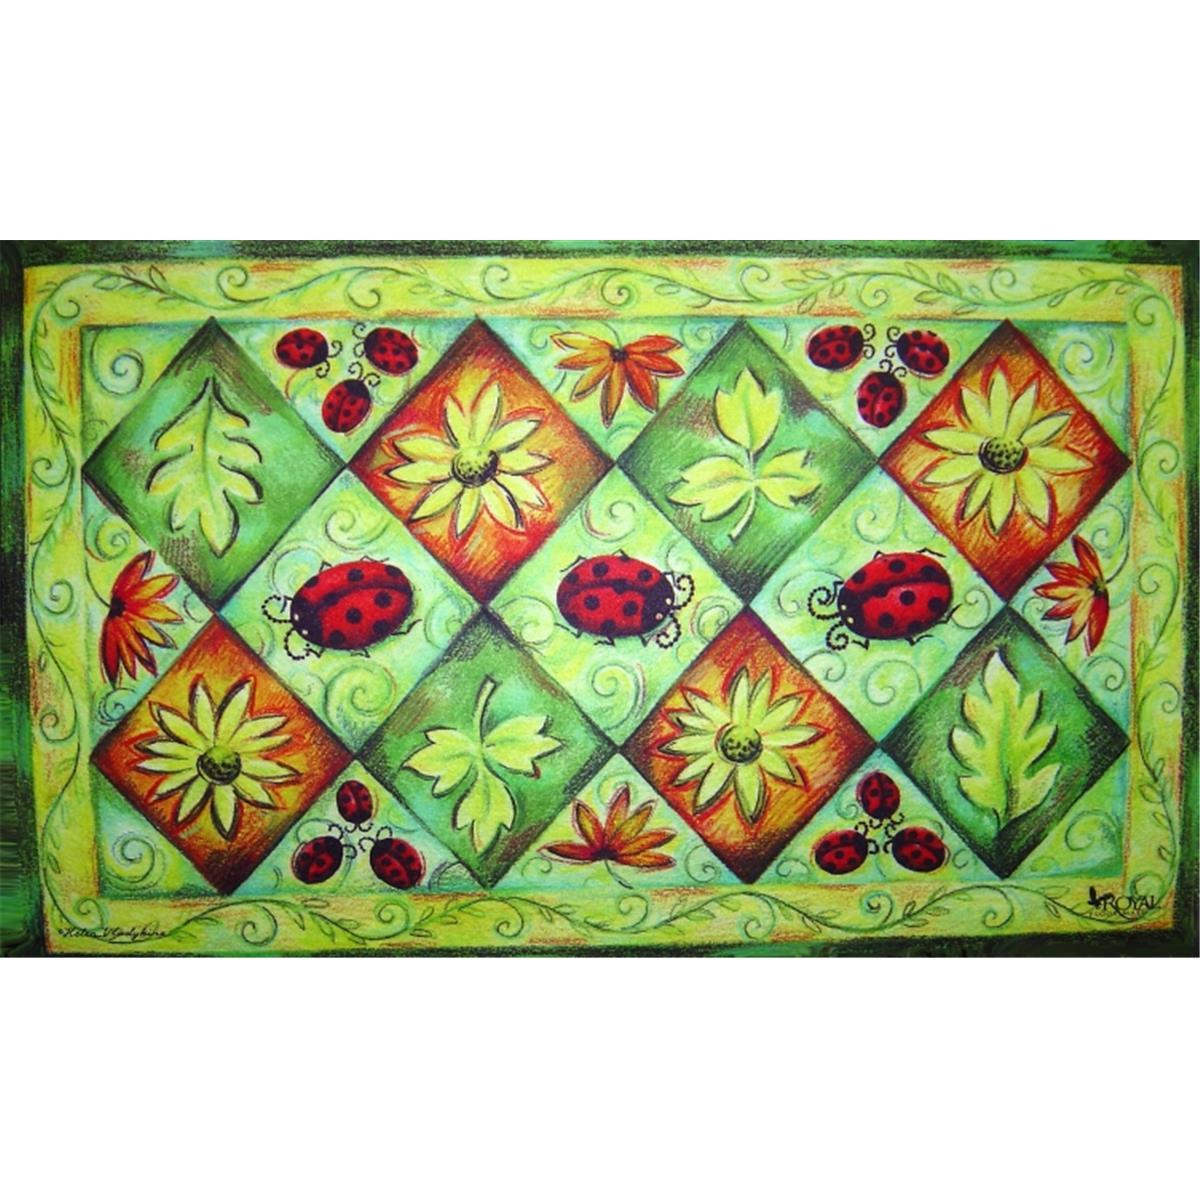 Cpr027 Lady Bug On Parade Doormat Rug, Green - 18 X 30 In.